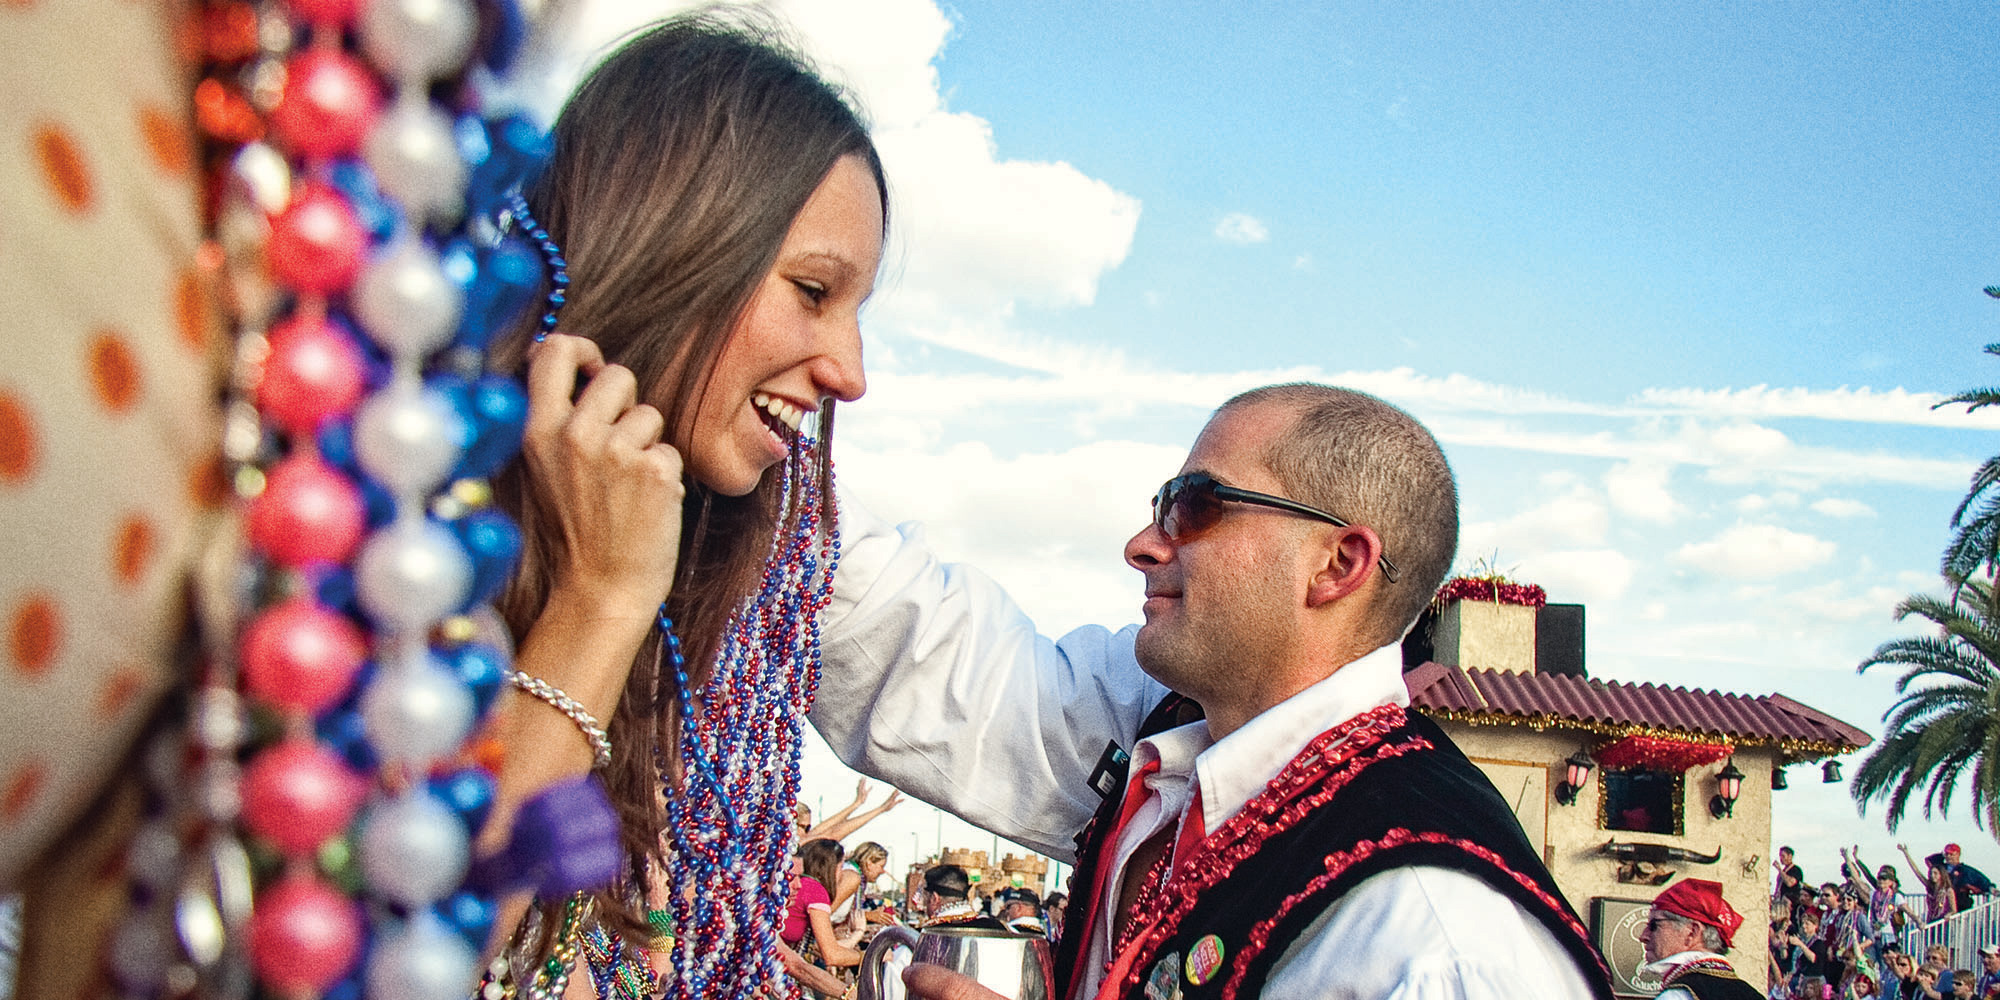 A member of the Gaucho Association of Tampa hands out beads during Gasparilla.